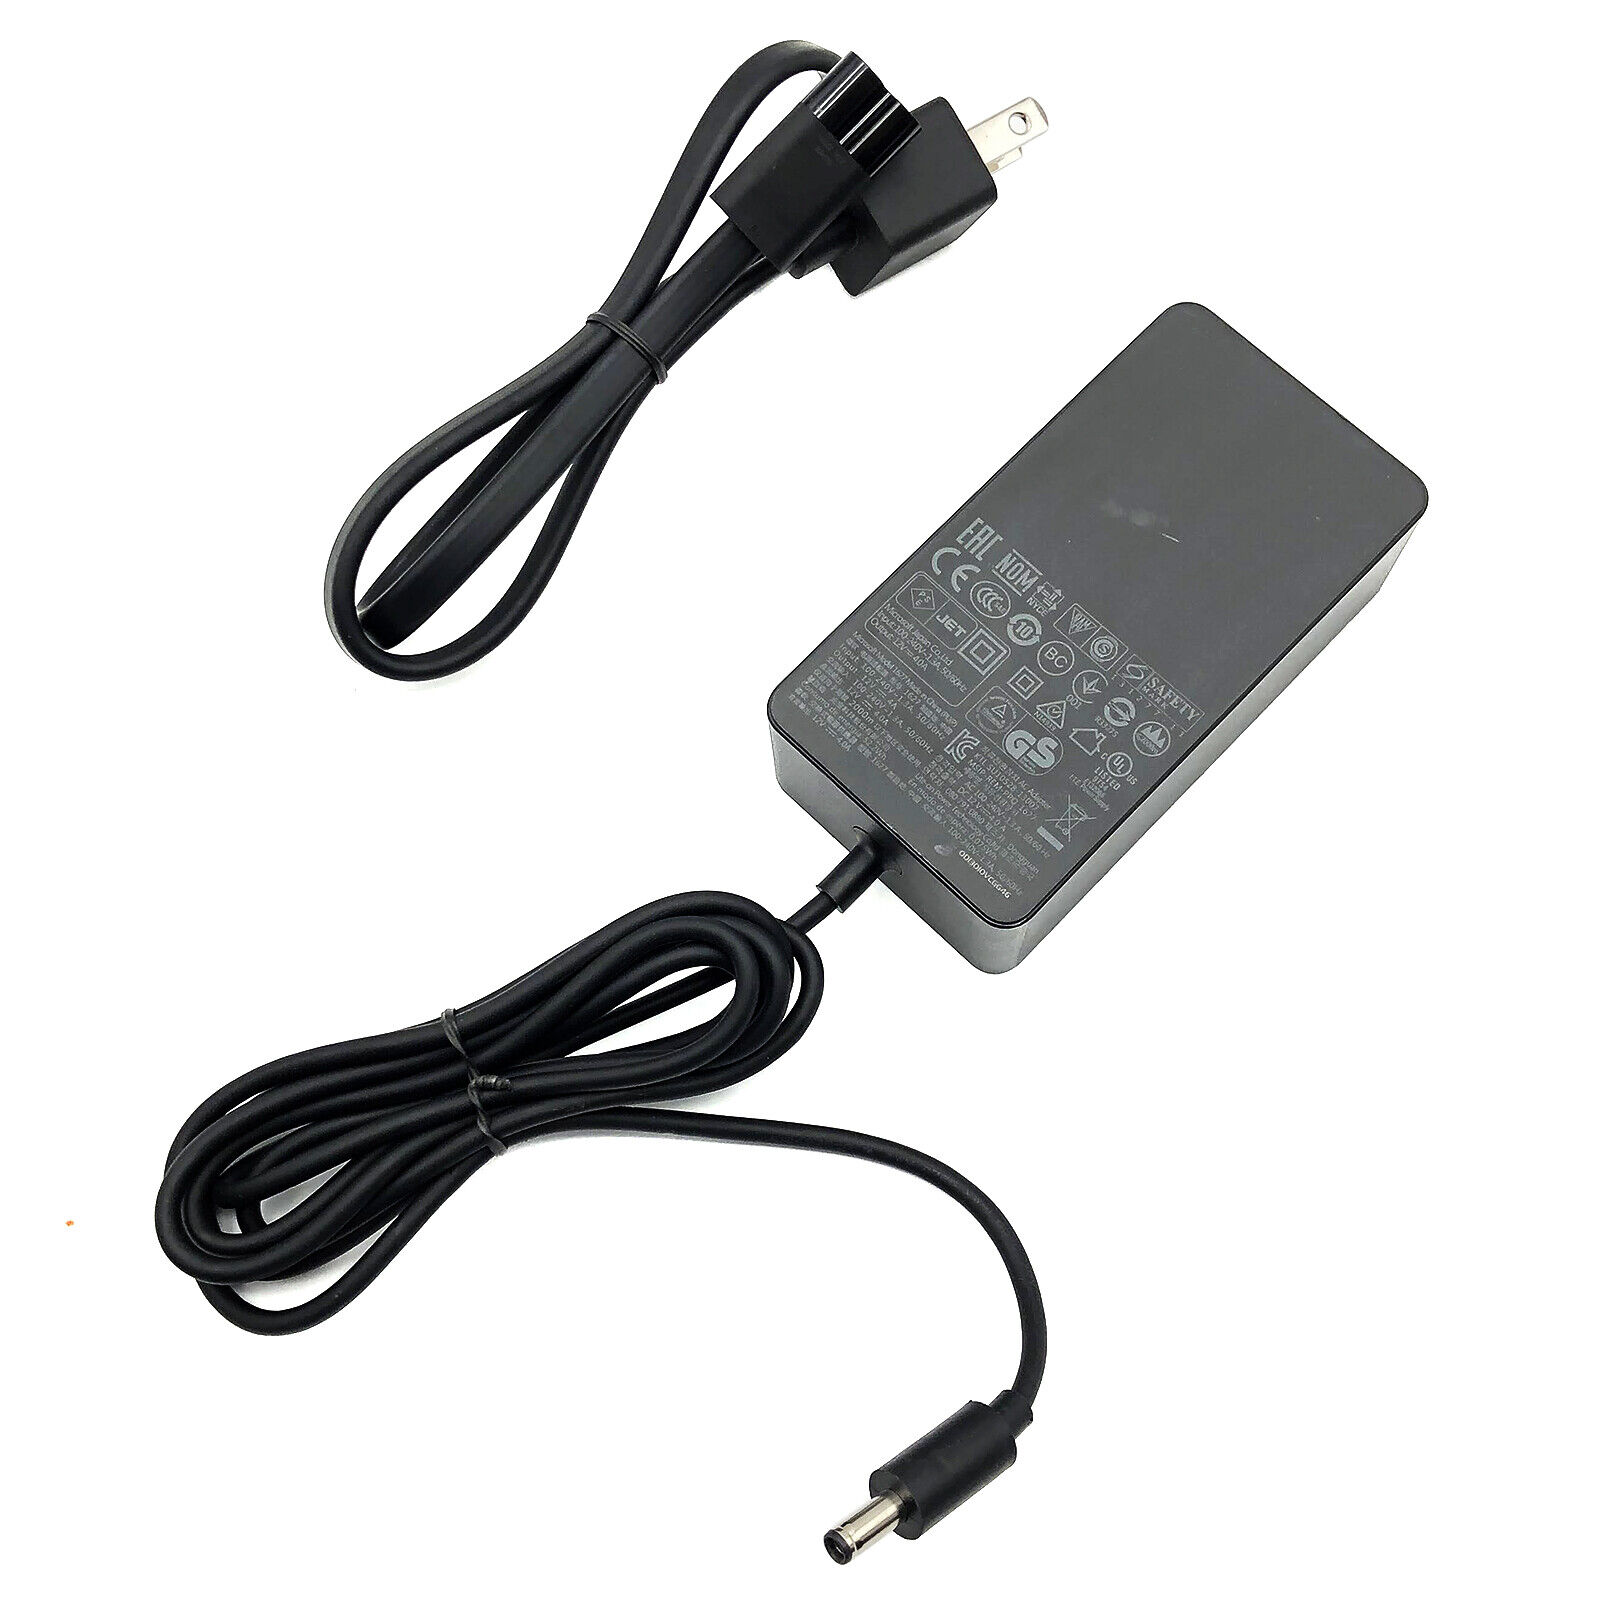 Genuine Microsoft 48W Adapter for Surface Pro 3 Dock Station Model 1664 w/Cord